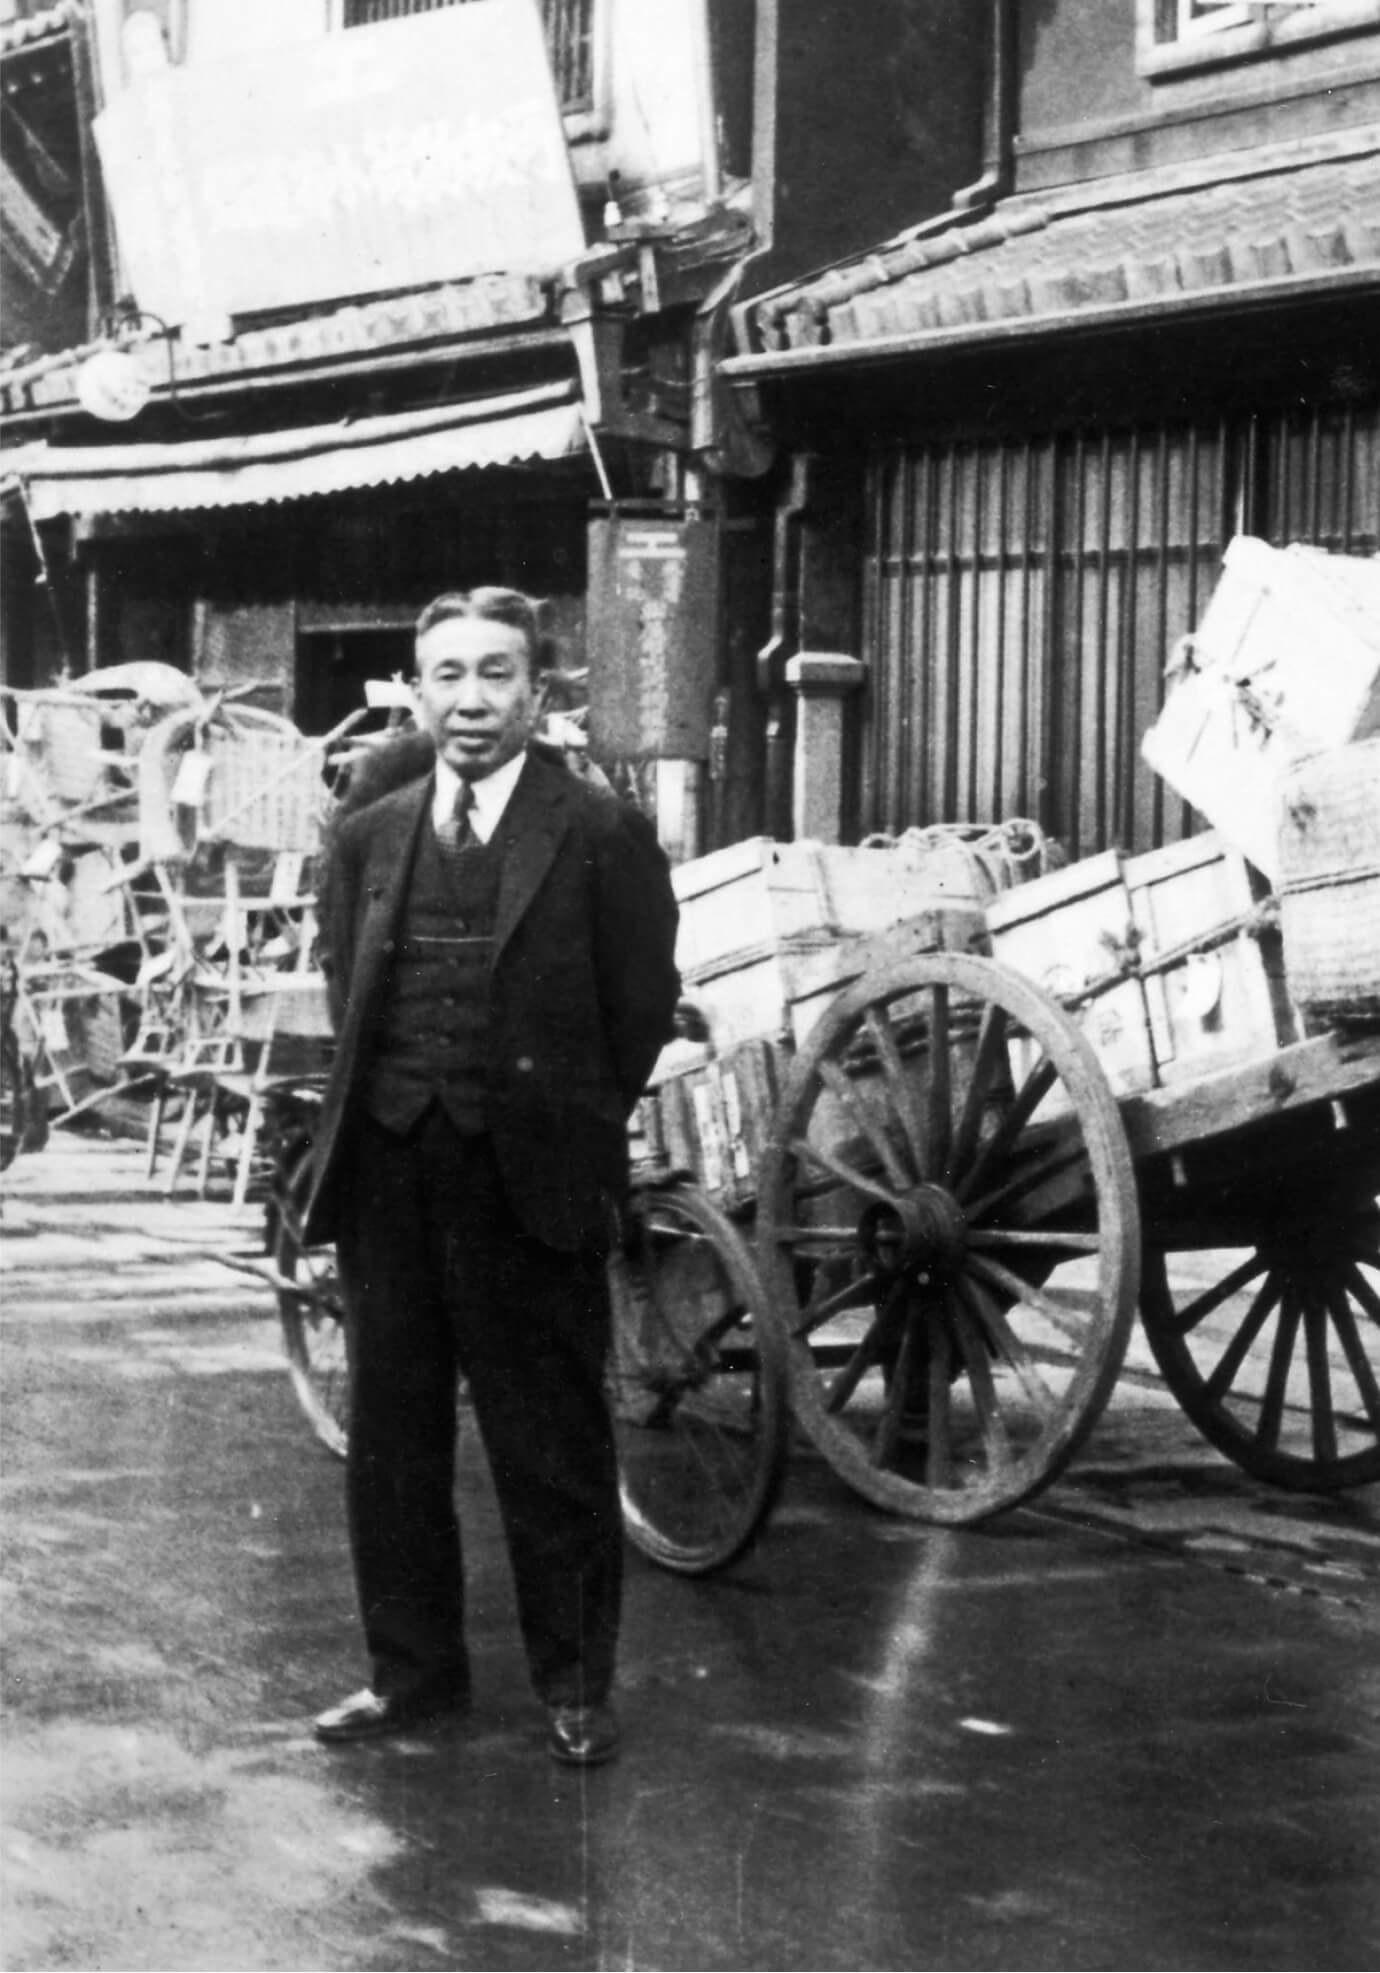 Historic black-and-white photo of Suntory founder Shinjiro Torii in front of wagon carts filled with crates